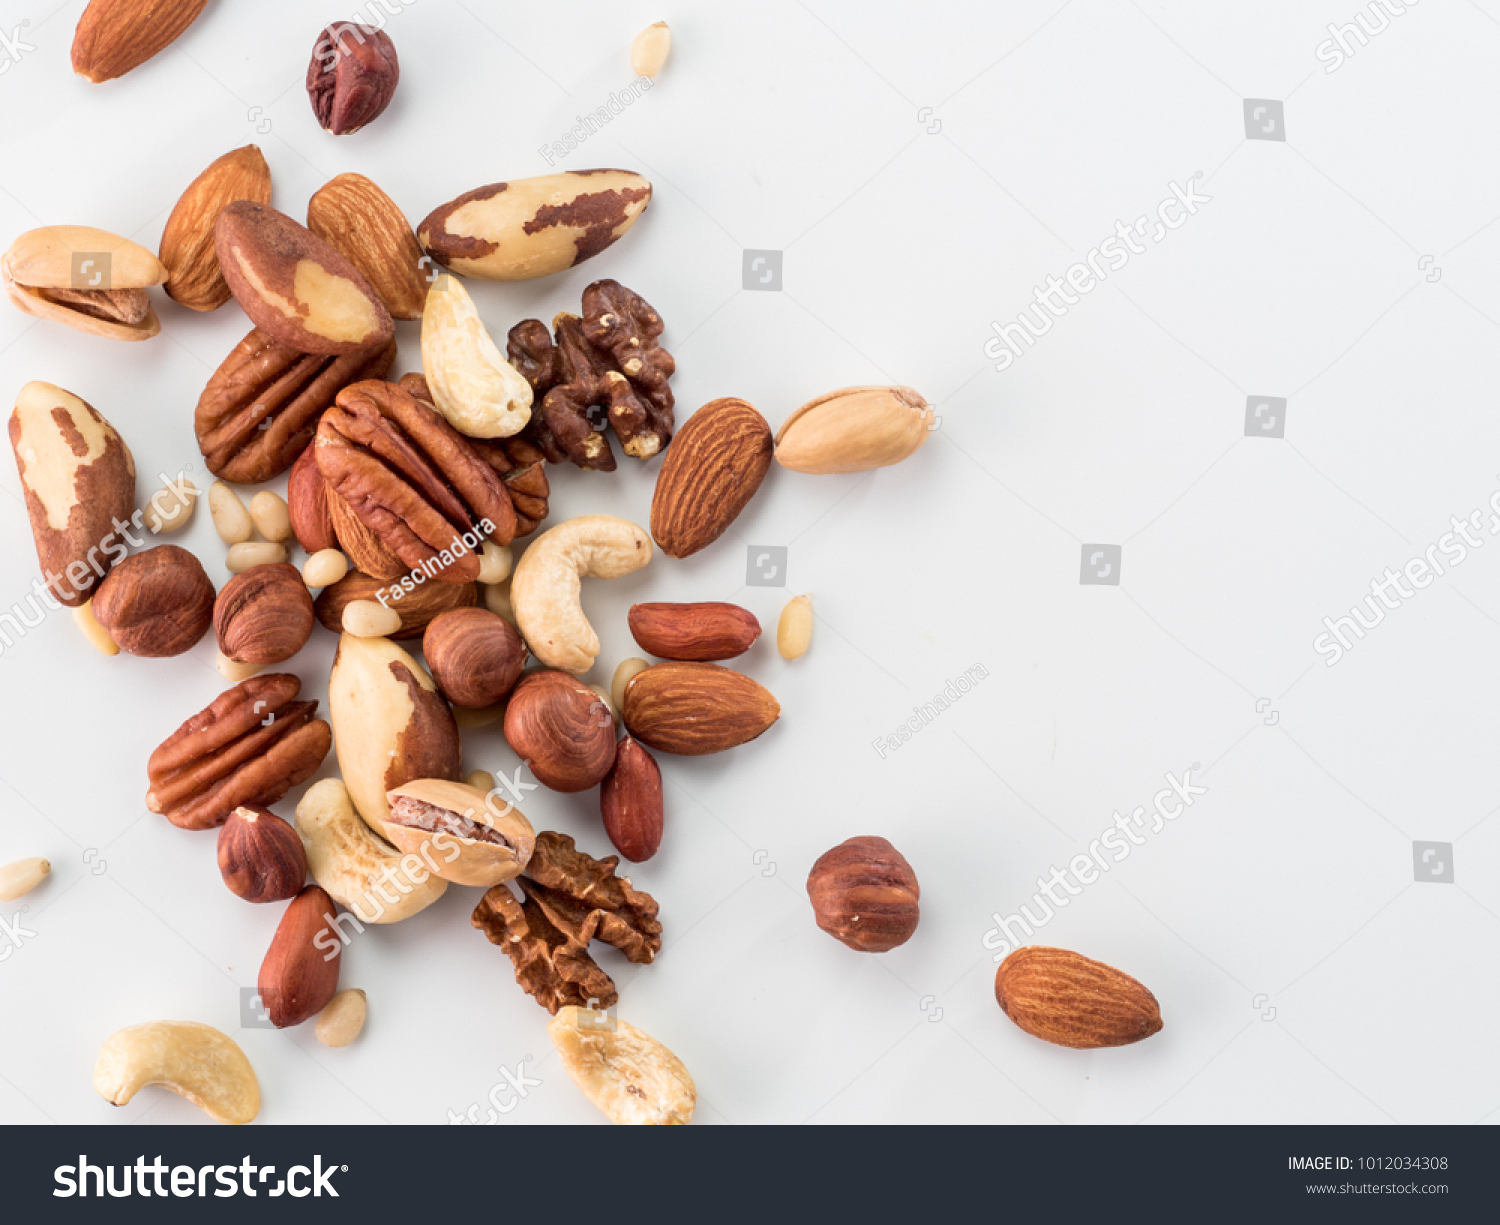 Background of nuts - pecan, macadamia, brazil nut, walnut, almonds, hazelnuts, pistachios, cashews, peanuts, pine nuts - with copy space. Isolated one edge. Top view or flat lay #1012034308